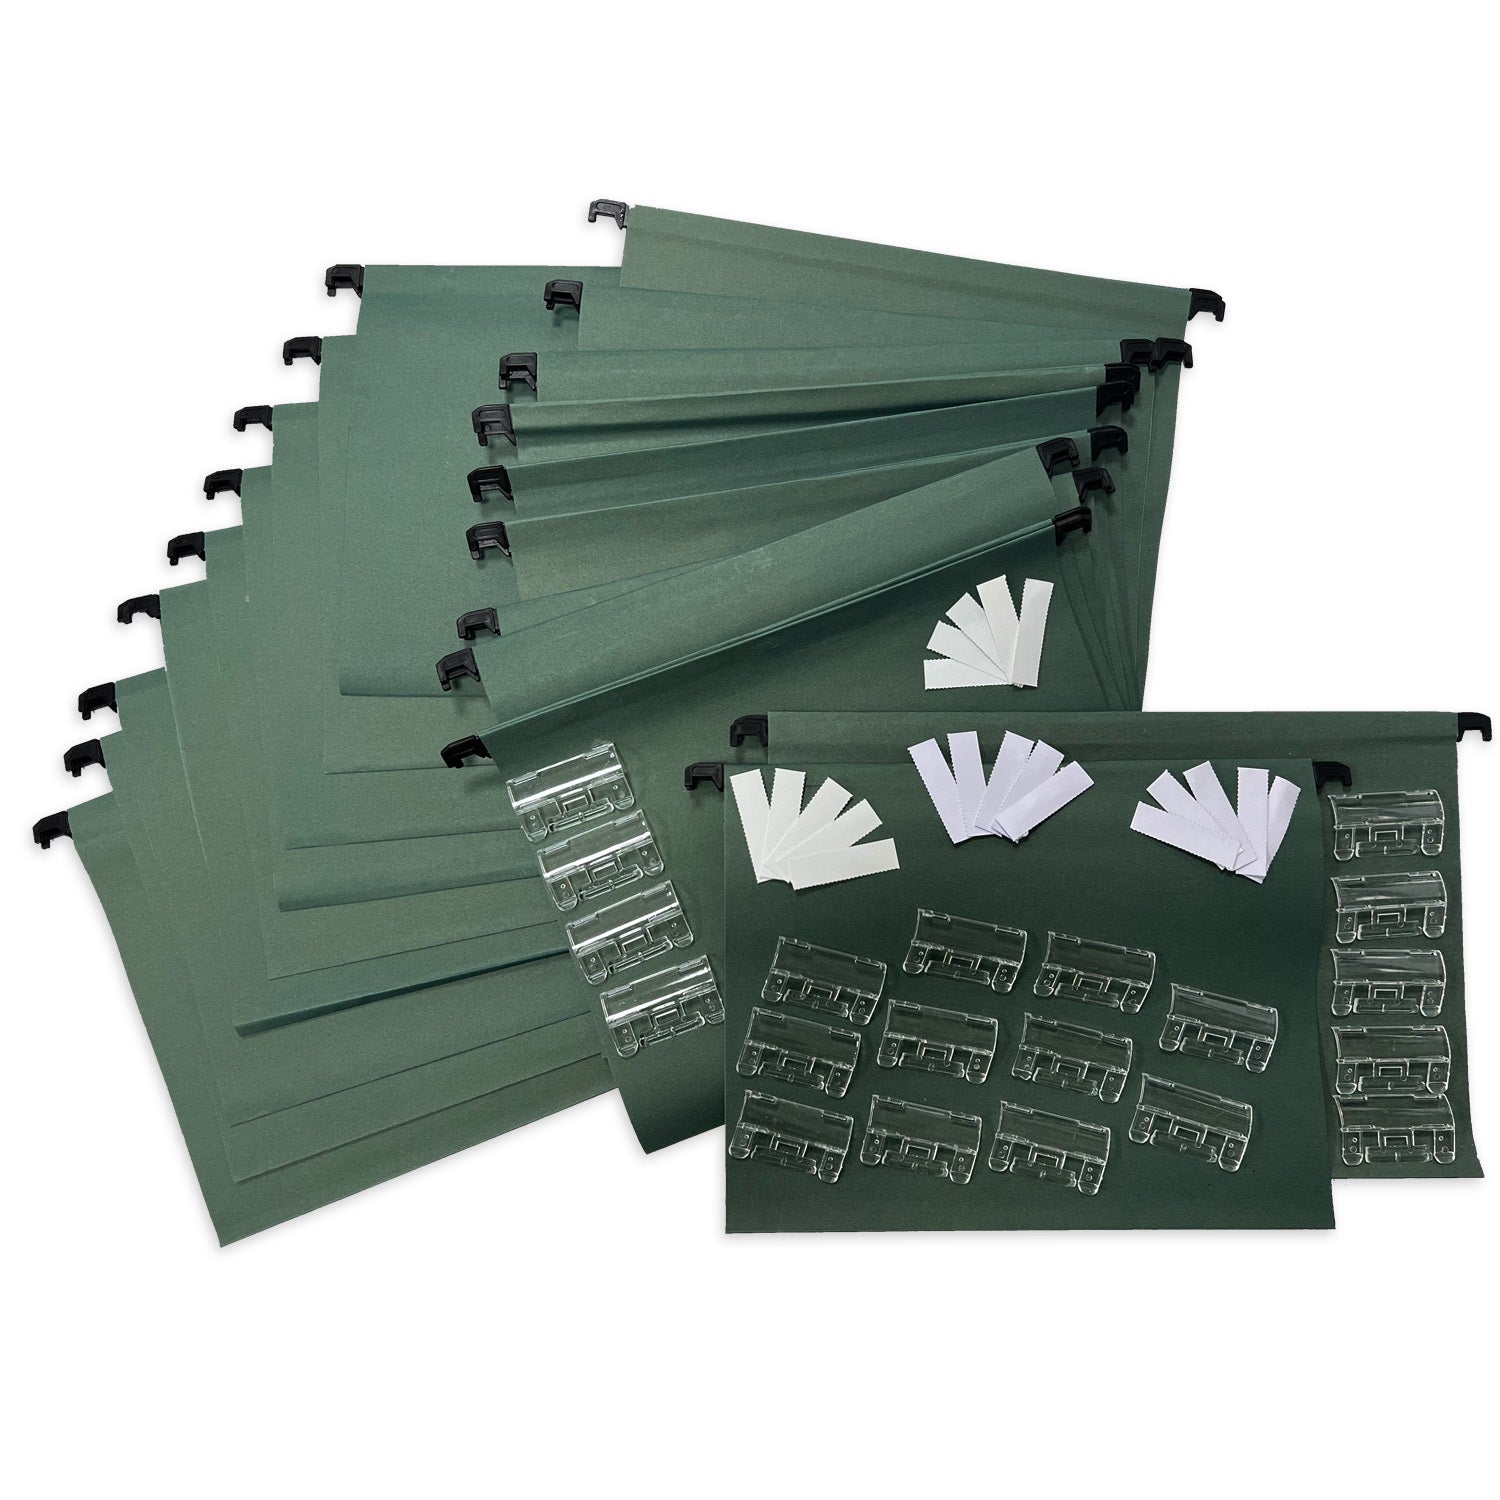 Array of 20 A4 green manilla suspension files fanned out with white paper inserts on top, accompanied by clear plastic tabs, ready for organization in a filing cabinet.